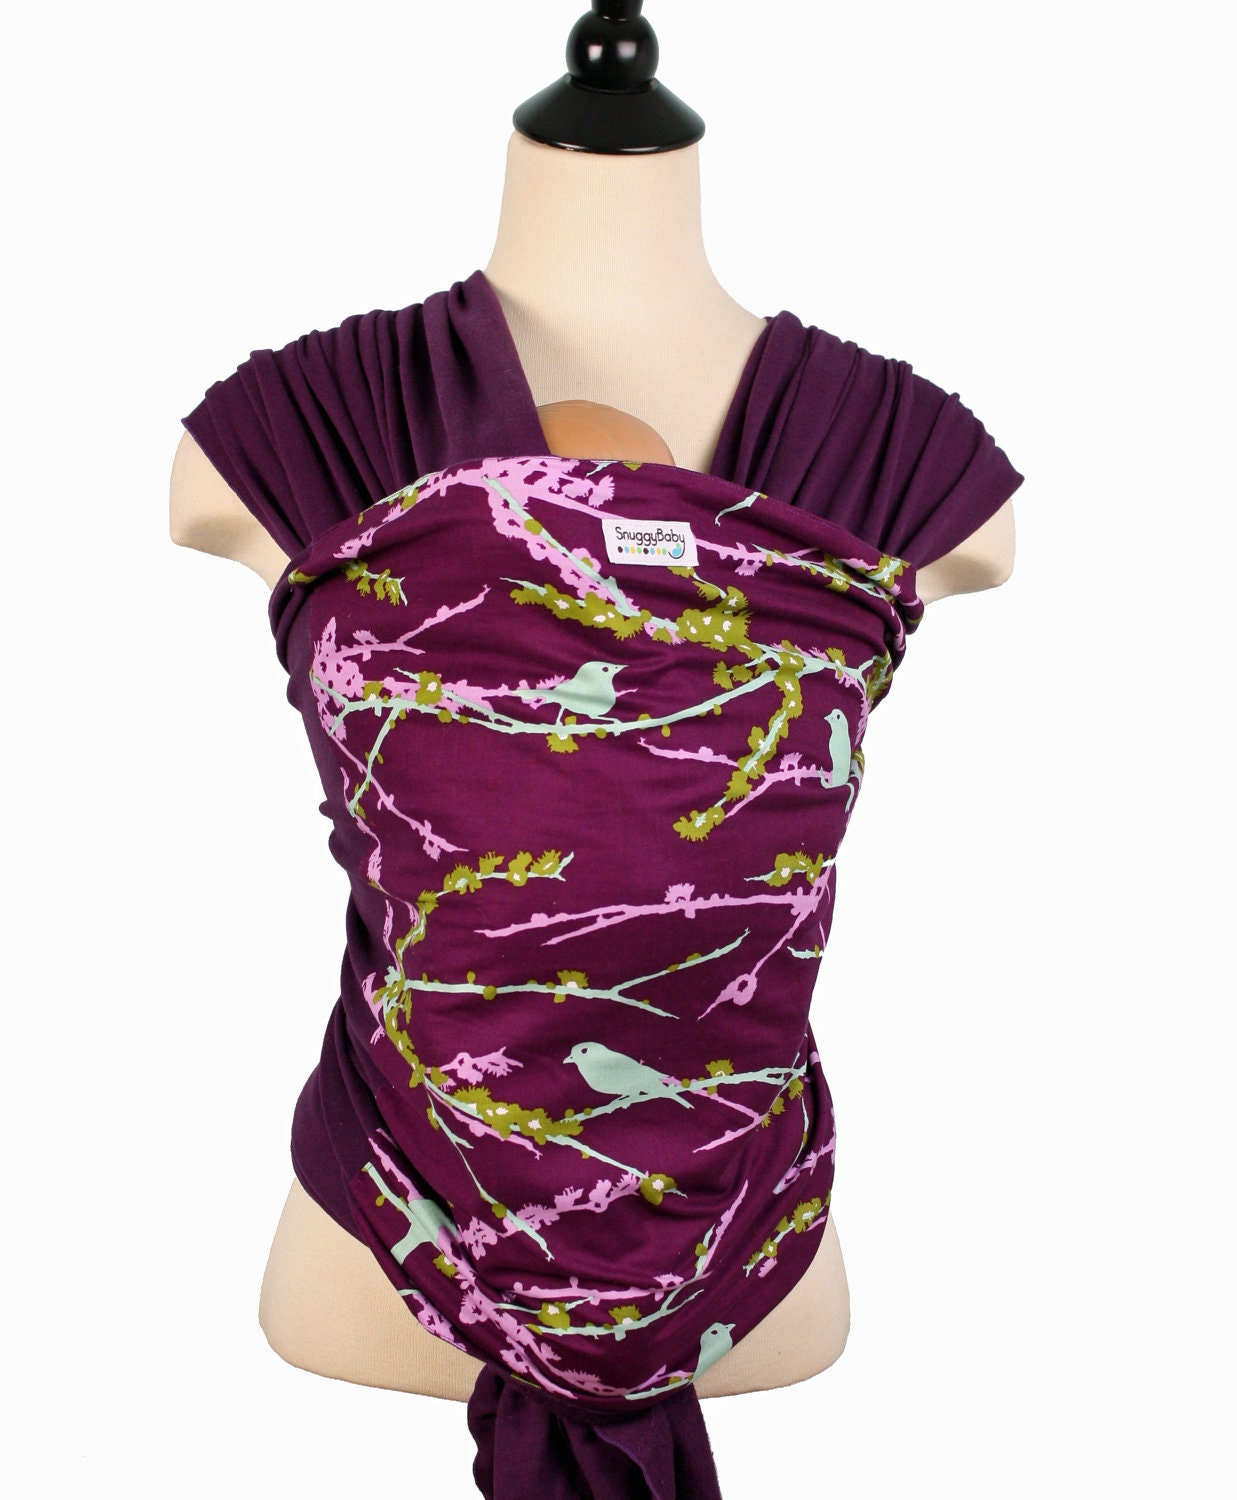 Baby Carrier Stretchy Wrap Baby Sling - Sparrow - Instructional DVD Included - FAST SHIPPING